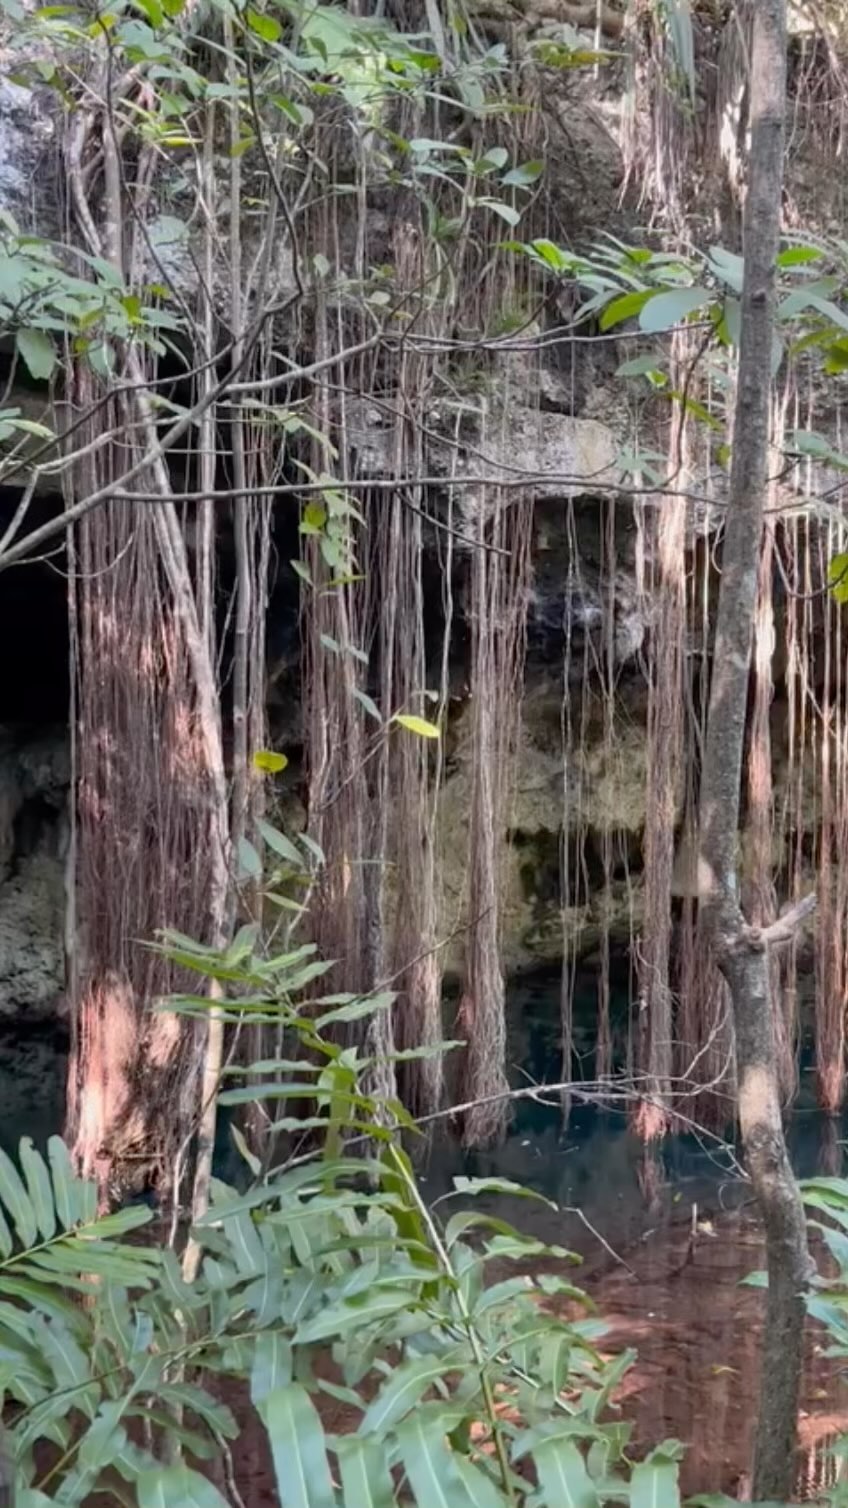 As we enter the Mayan Jungle, we are immediately enveloped by the sounds and views of nature. Here’s where we uncover new possibilities and have authentic experiences.

#akumalnaturaexperiences #Mexico #RivieraMaya #glamping #junglelife #jungle #nature #cenote